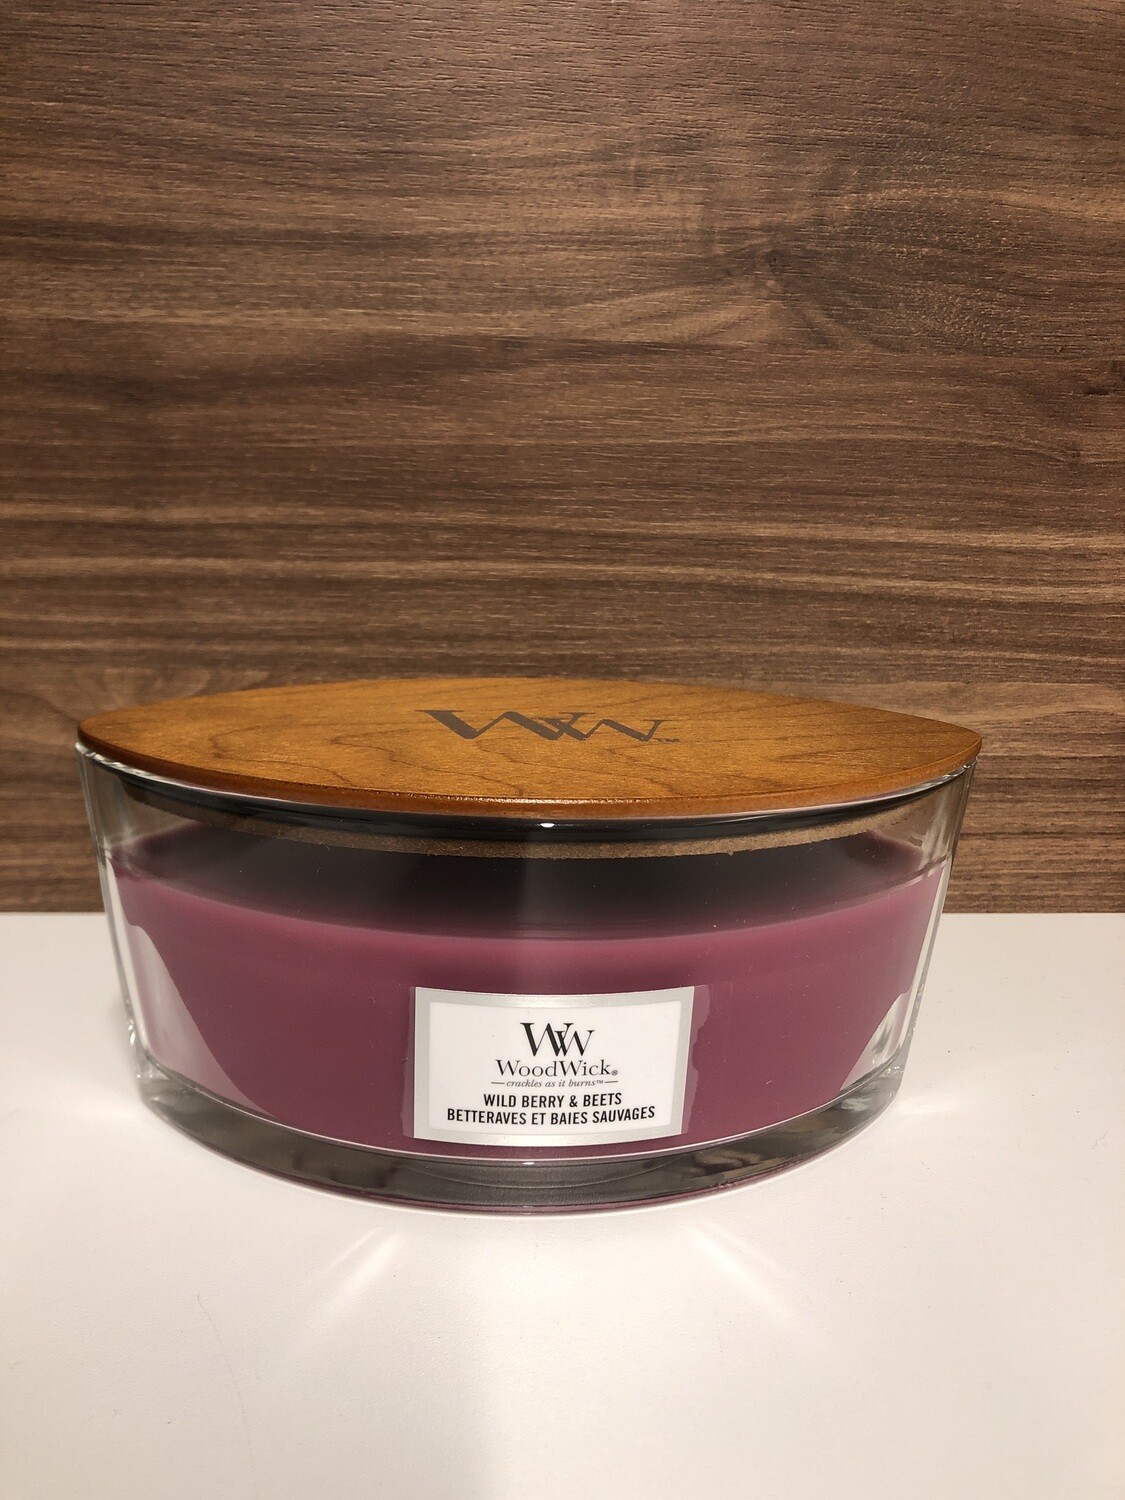 Woodwick ellipse pressed blooms and patchouli